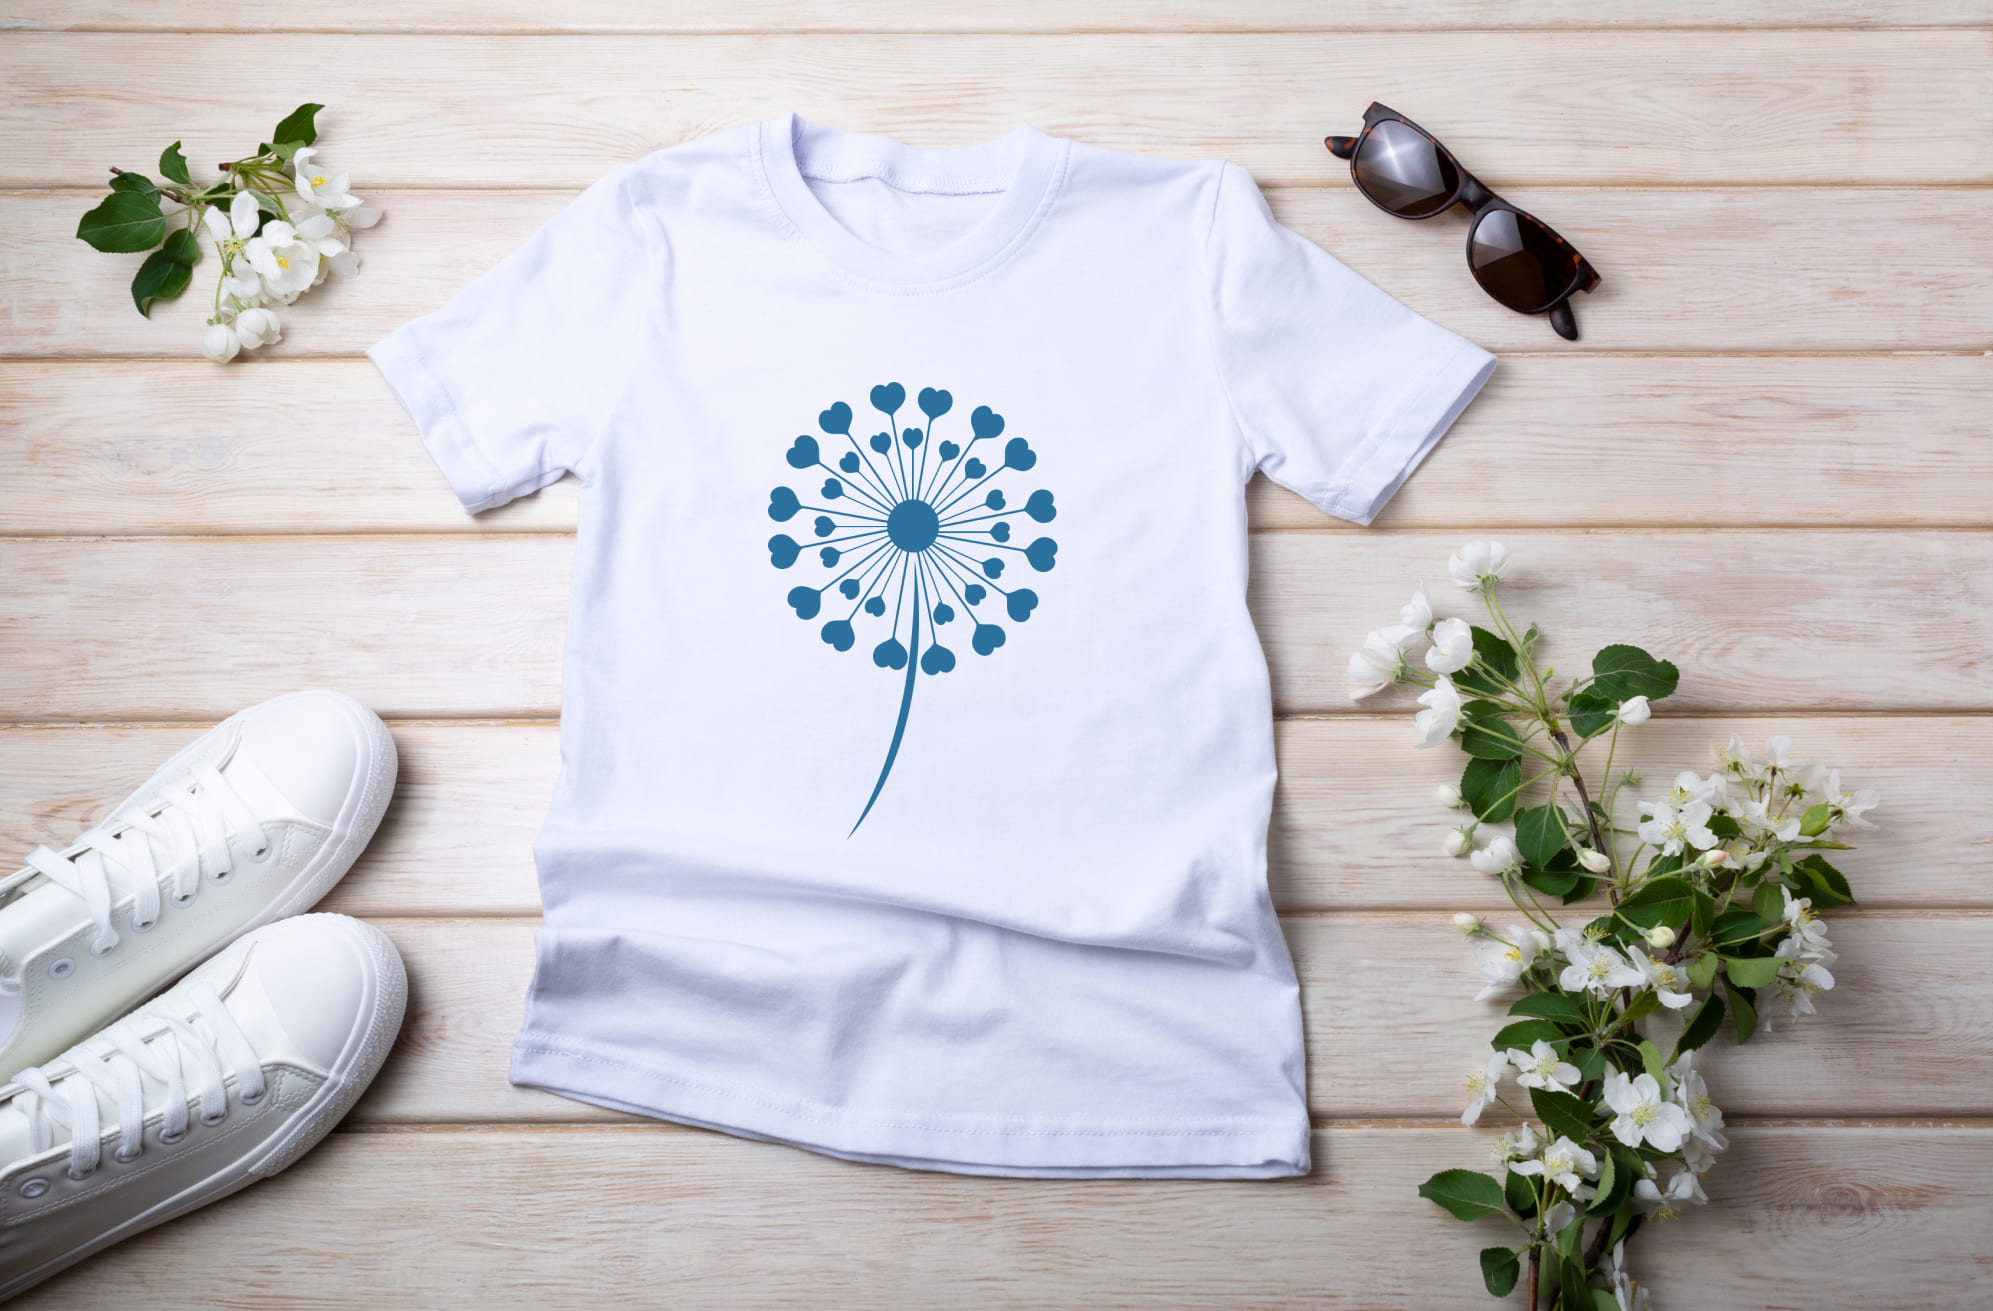 White T-shirt with blue dandelion flower and sunglasses with white sneakers.